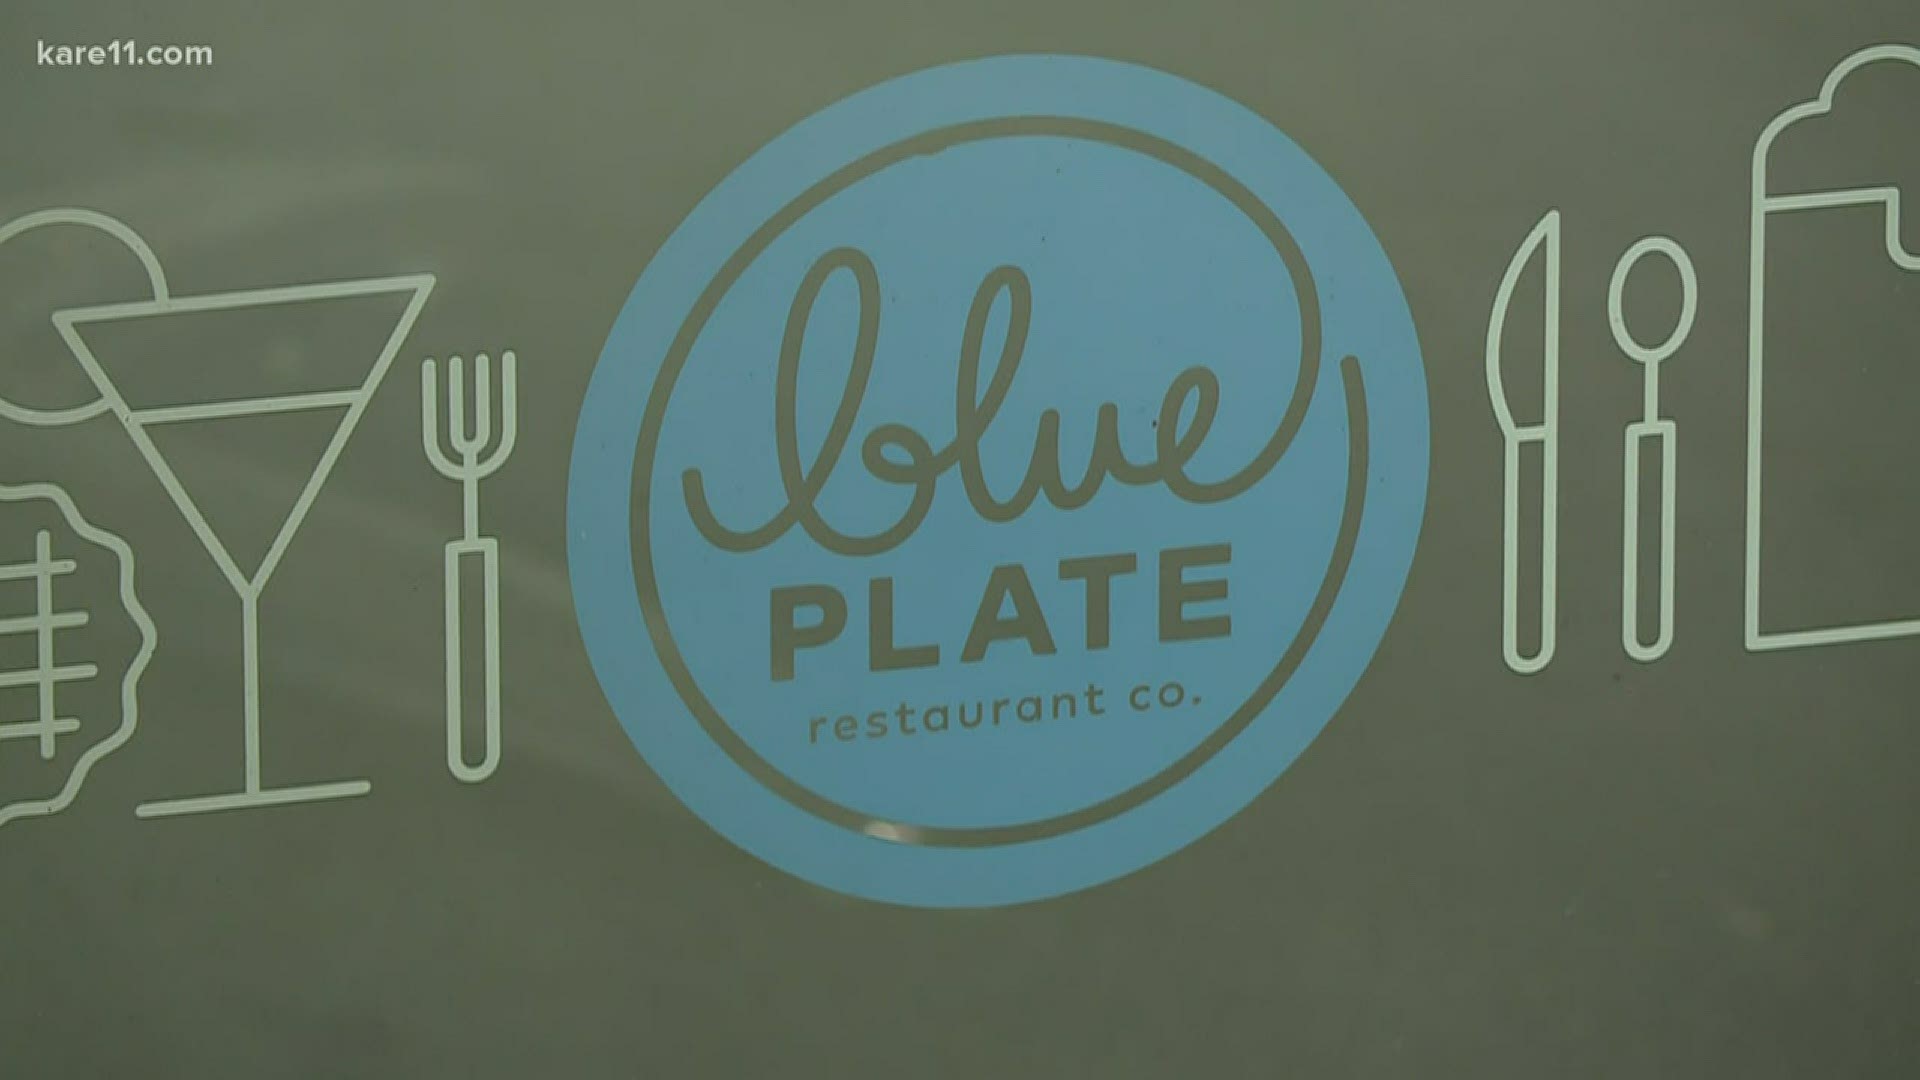 The Blue Plate Restaurant is one of many establishments impacted by the coronavirus pandemic.